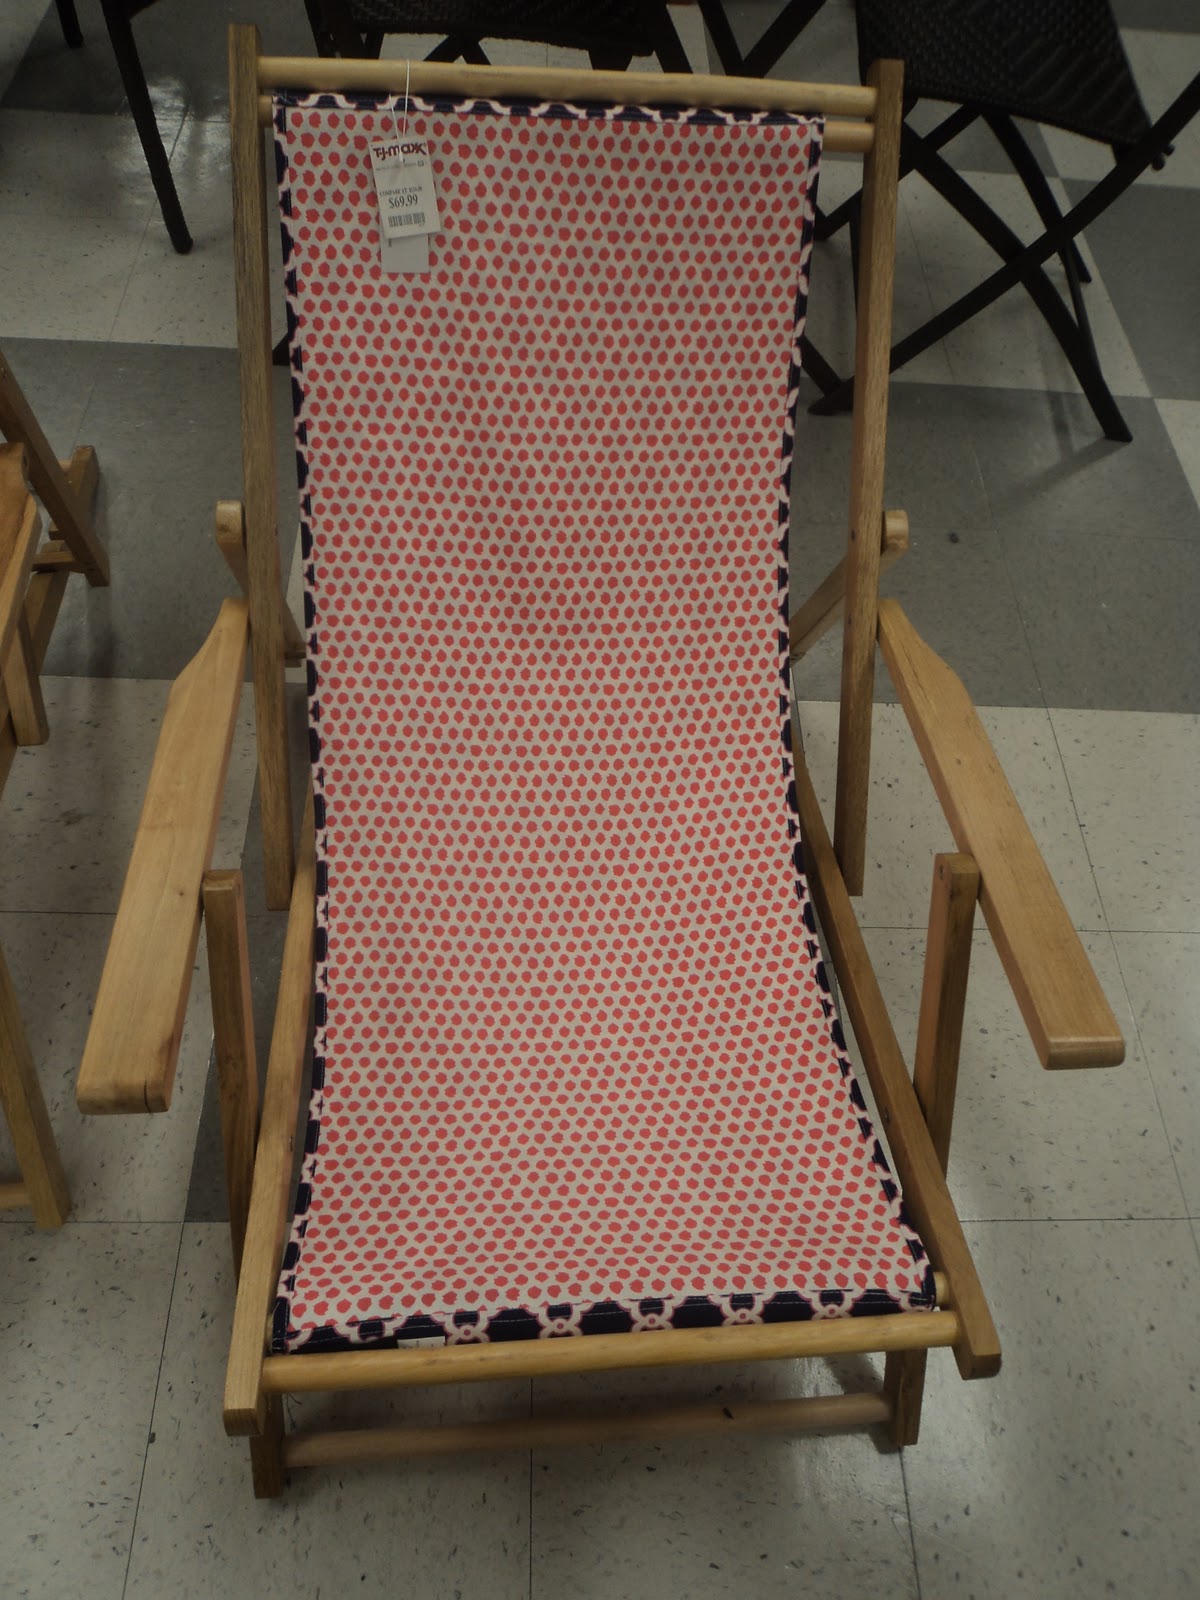 Richmond Thrifter: Out and About- TJMaxx - Lovely outdoor chairs with THE CUTEST fabric! $69.99 (regular $120)